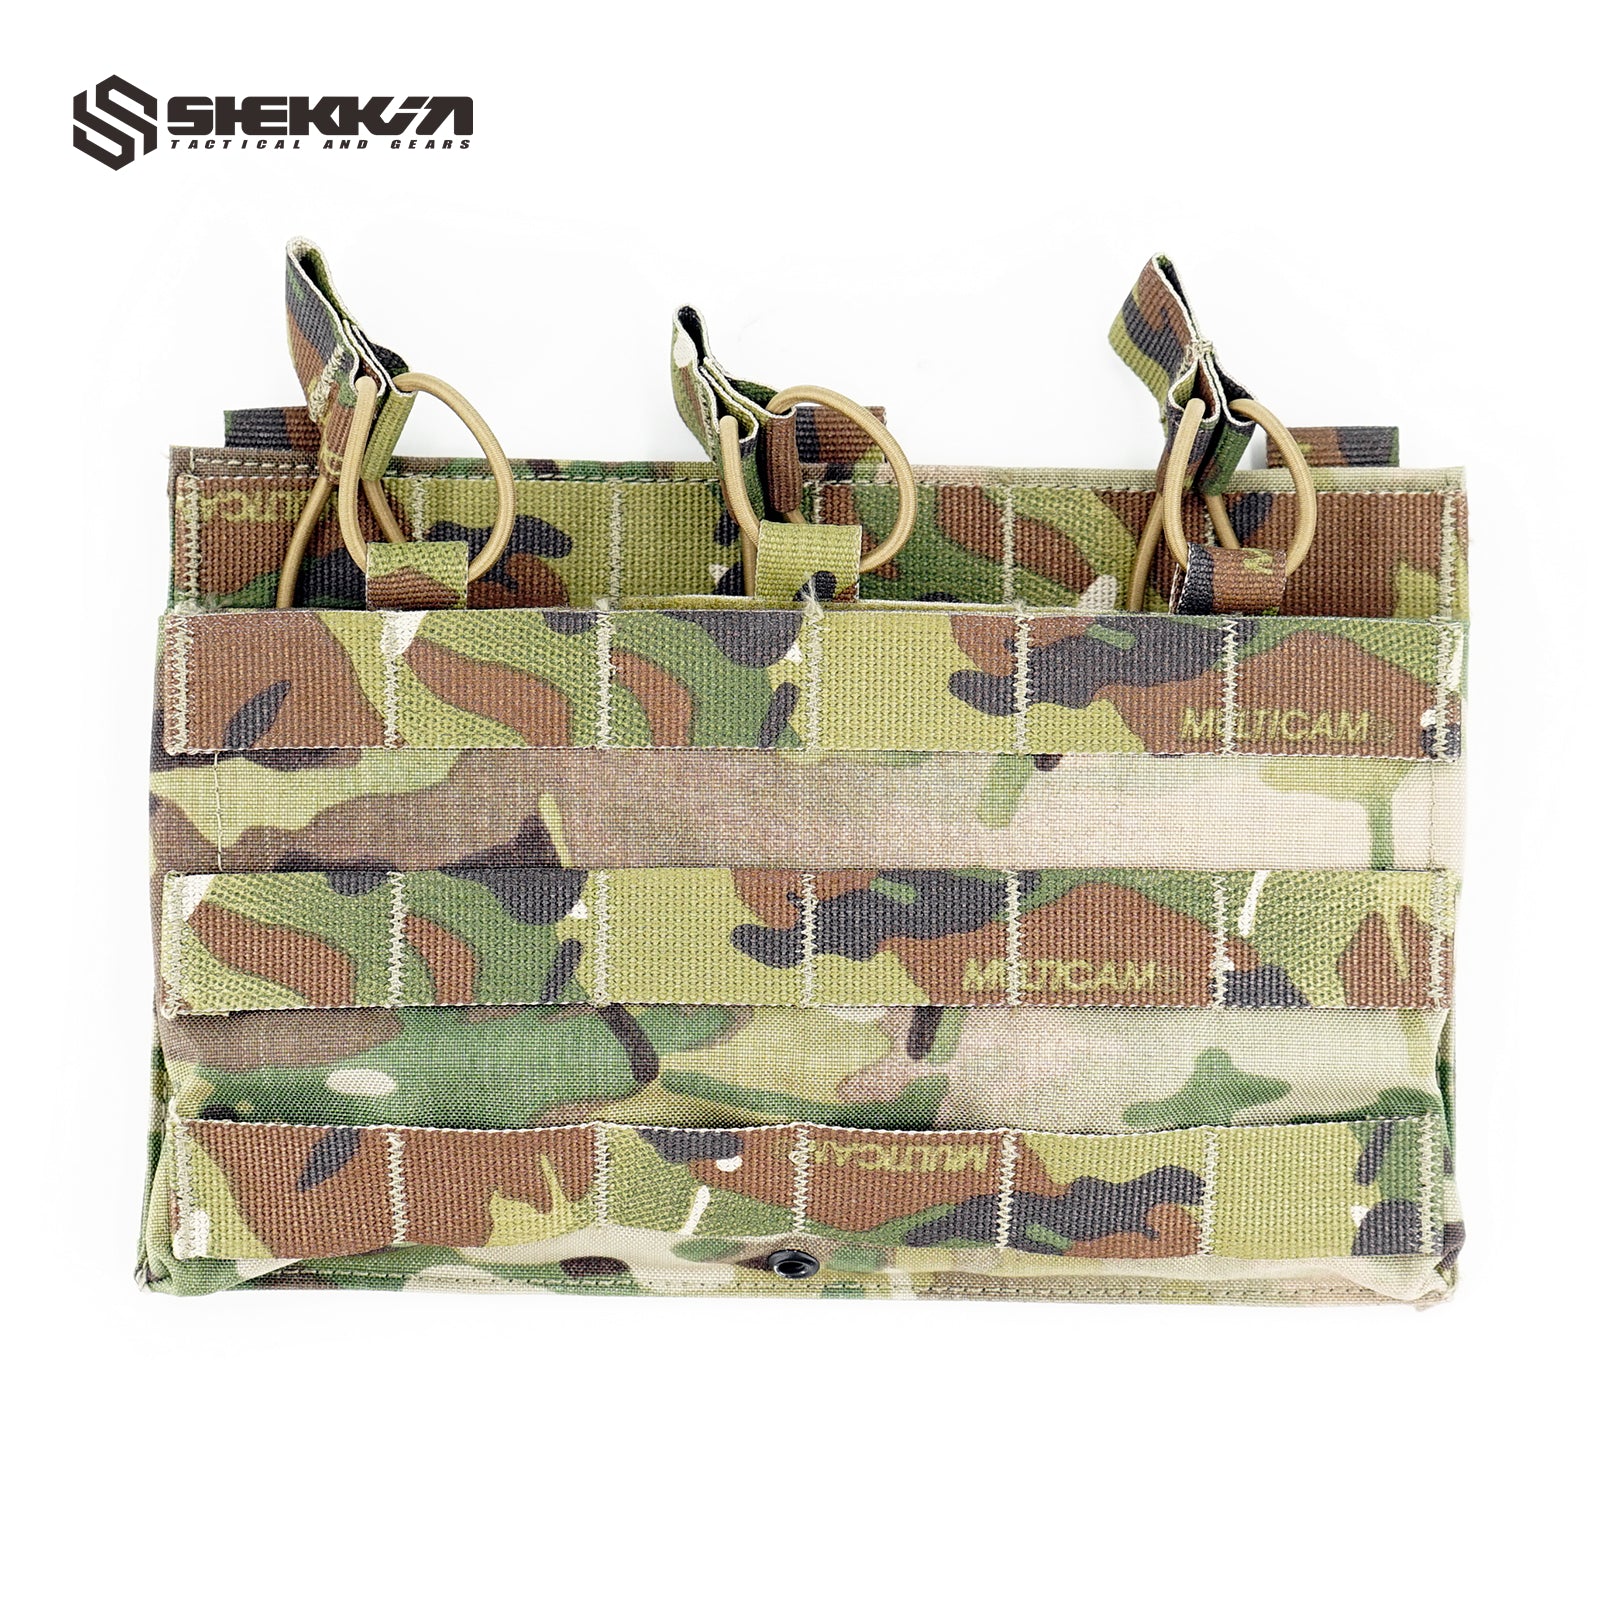 Kangaroo Triple Rifle Mag Pouch for T5 Plate Carrier - Shekkin Gears